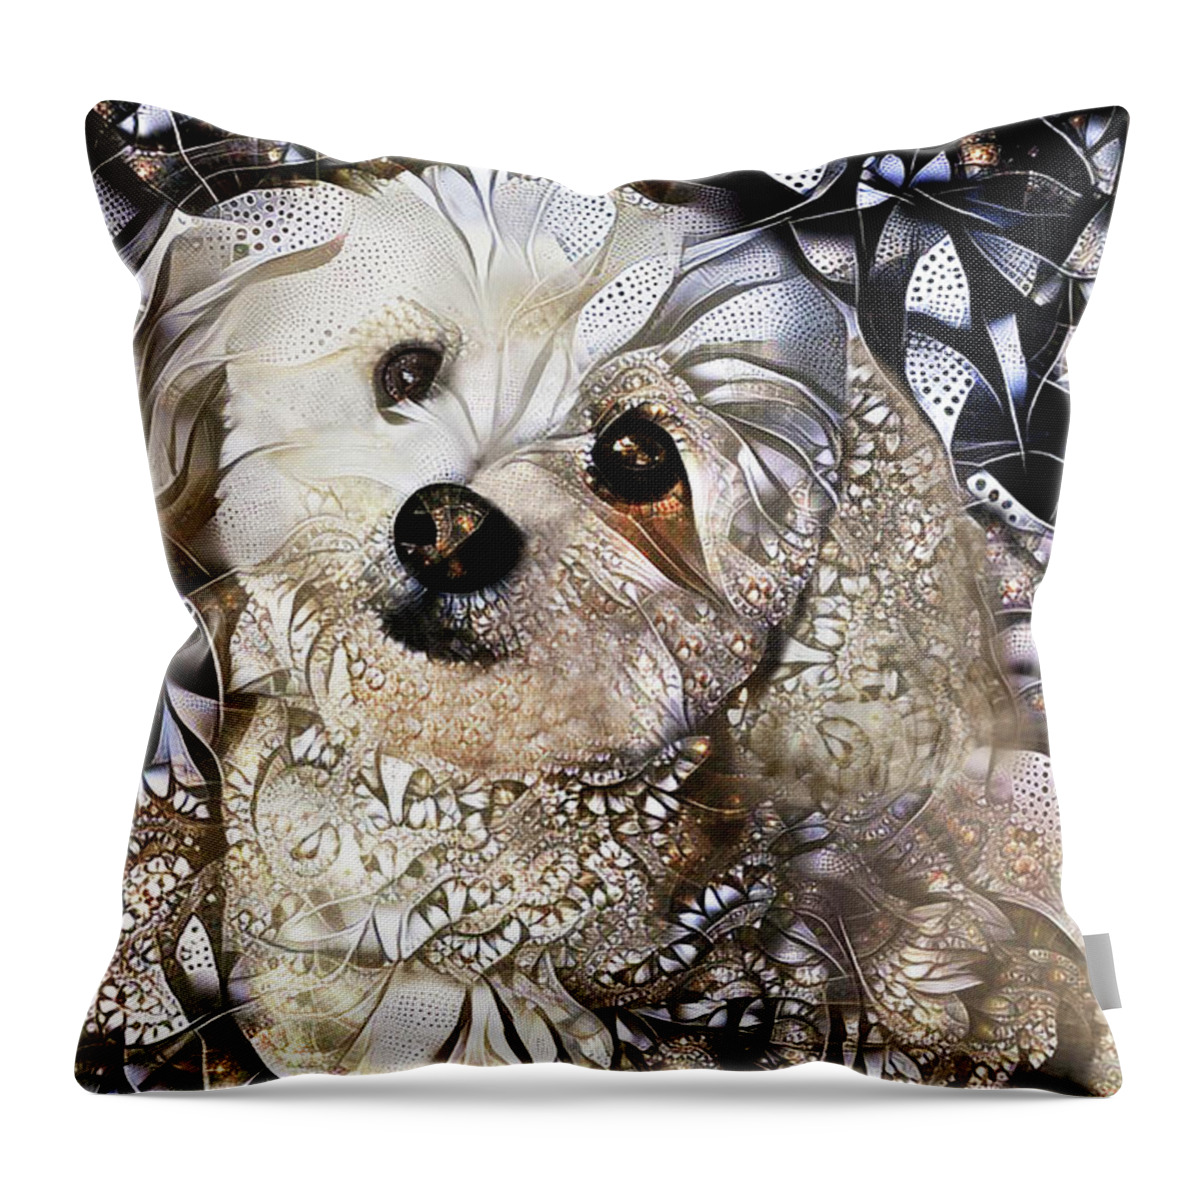 Maltese Dog Throw Pillow featuring the digital art The Cutest Puppy Ever by Peggy Collins